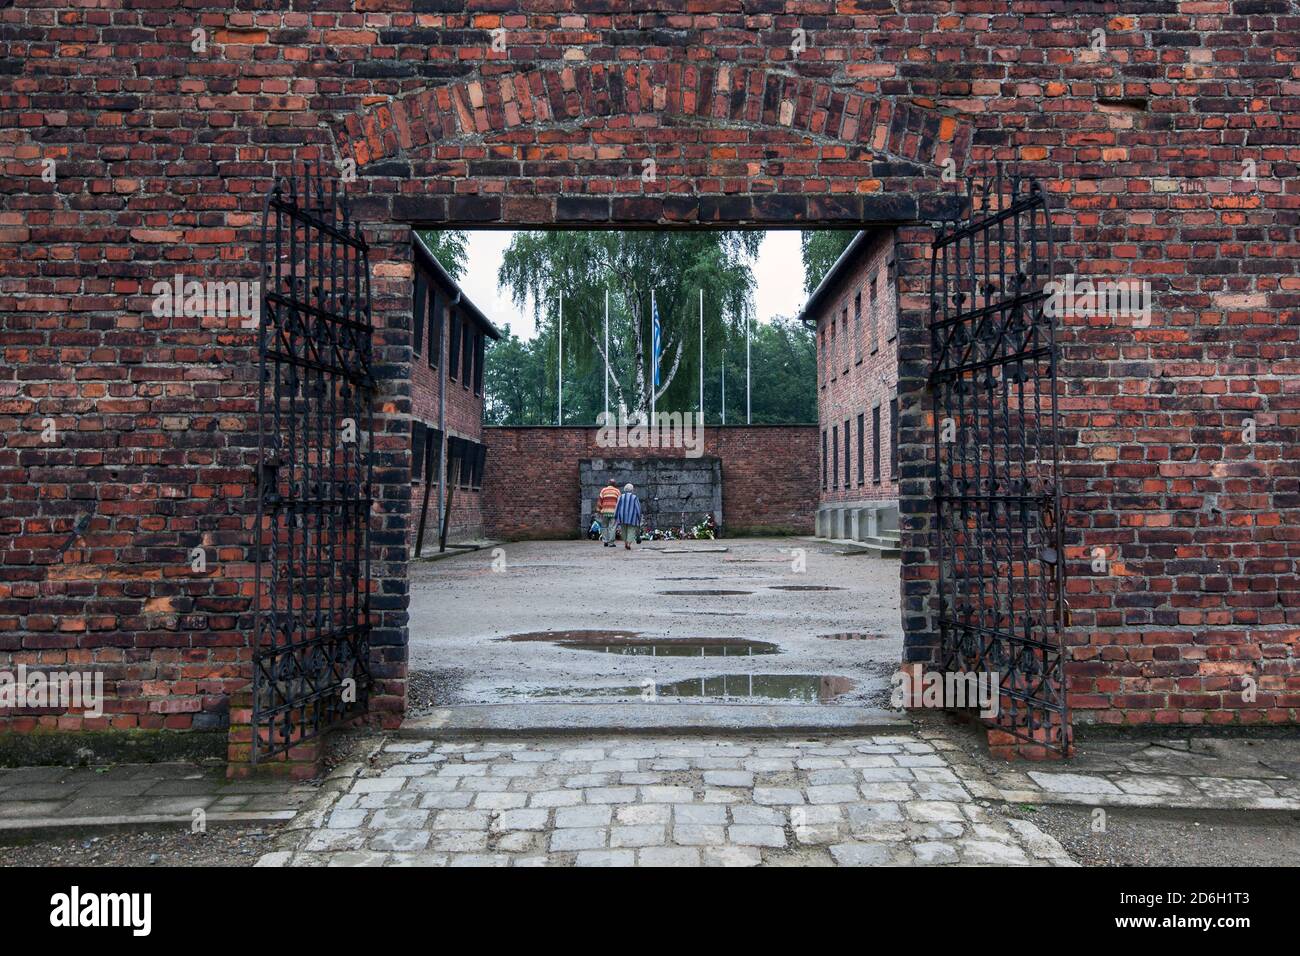 Between Block 10 and 11 at Auschwitz-Birkenau State Museum at Oswiecim in Poland an execution wall was constructed where many prisoners were shot. Stock Photo